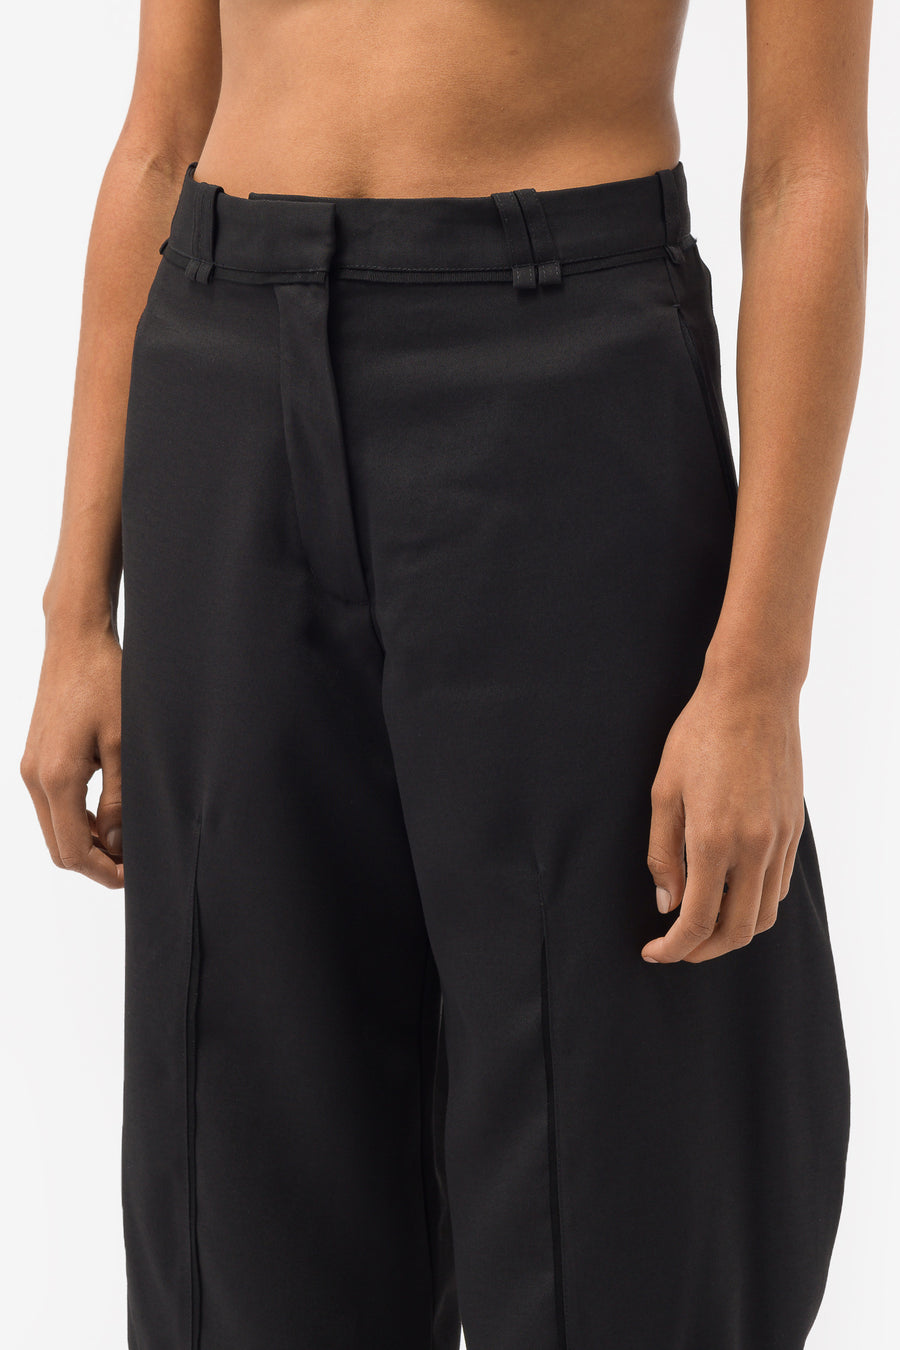 Hina Pleat Trousers in Crow Black